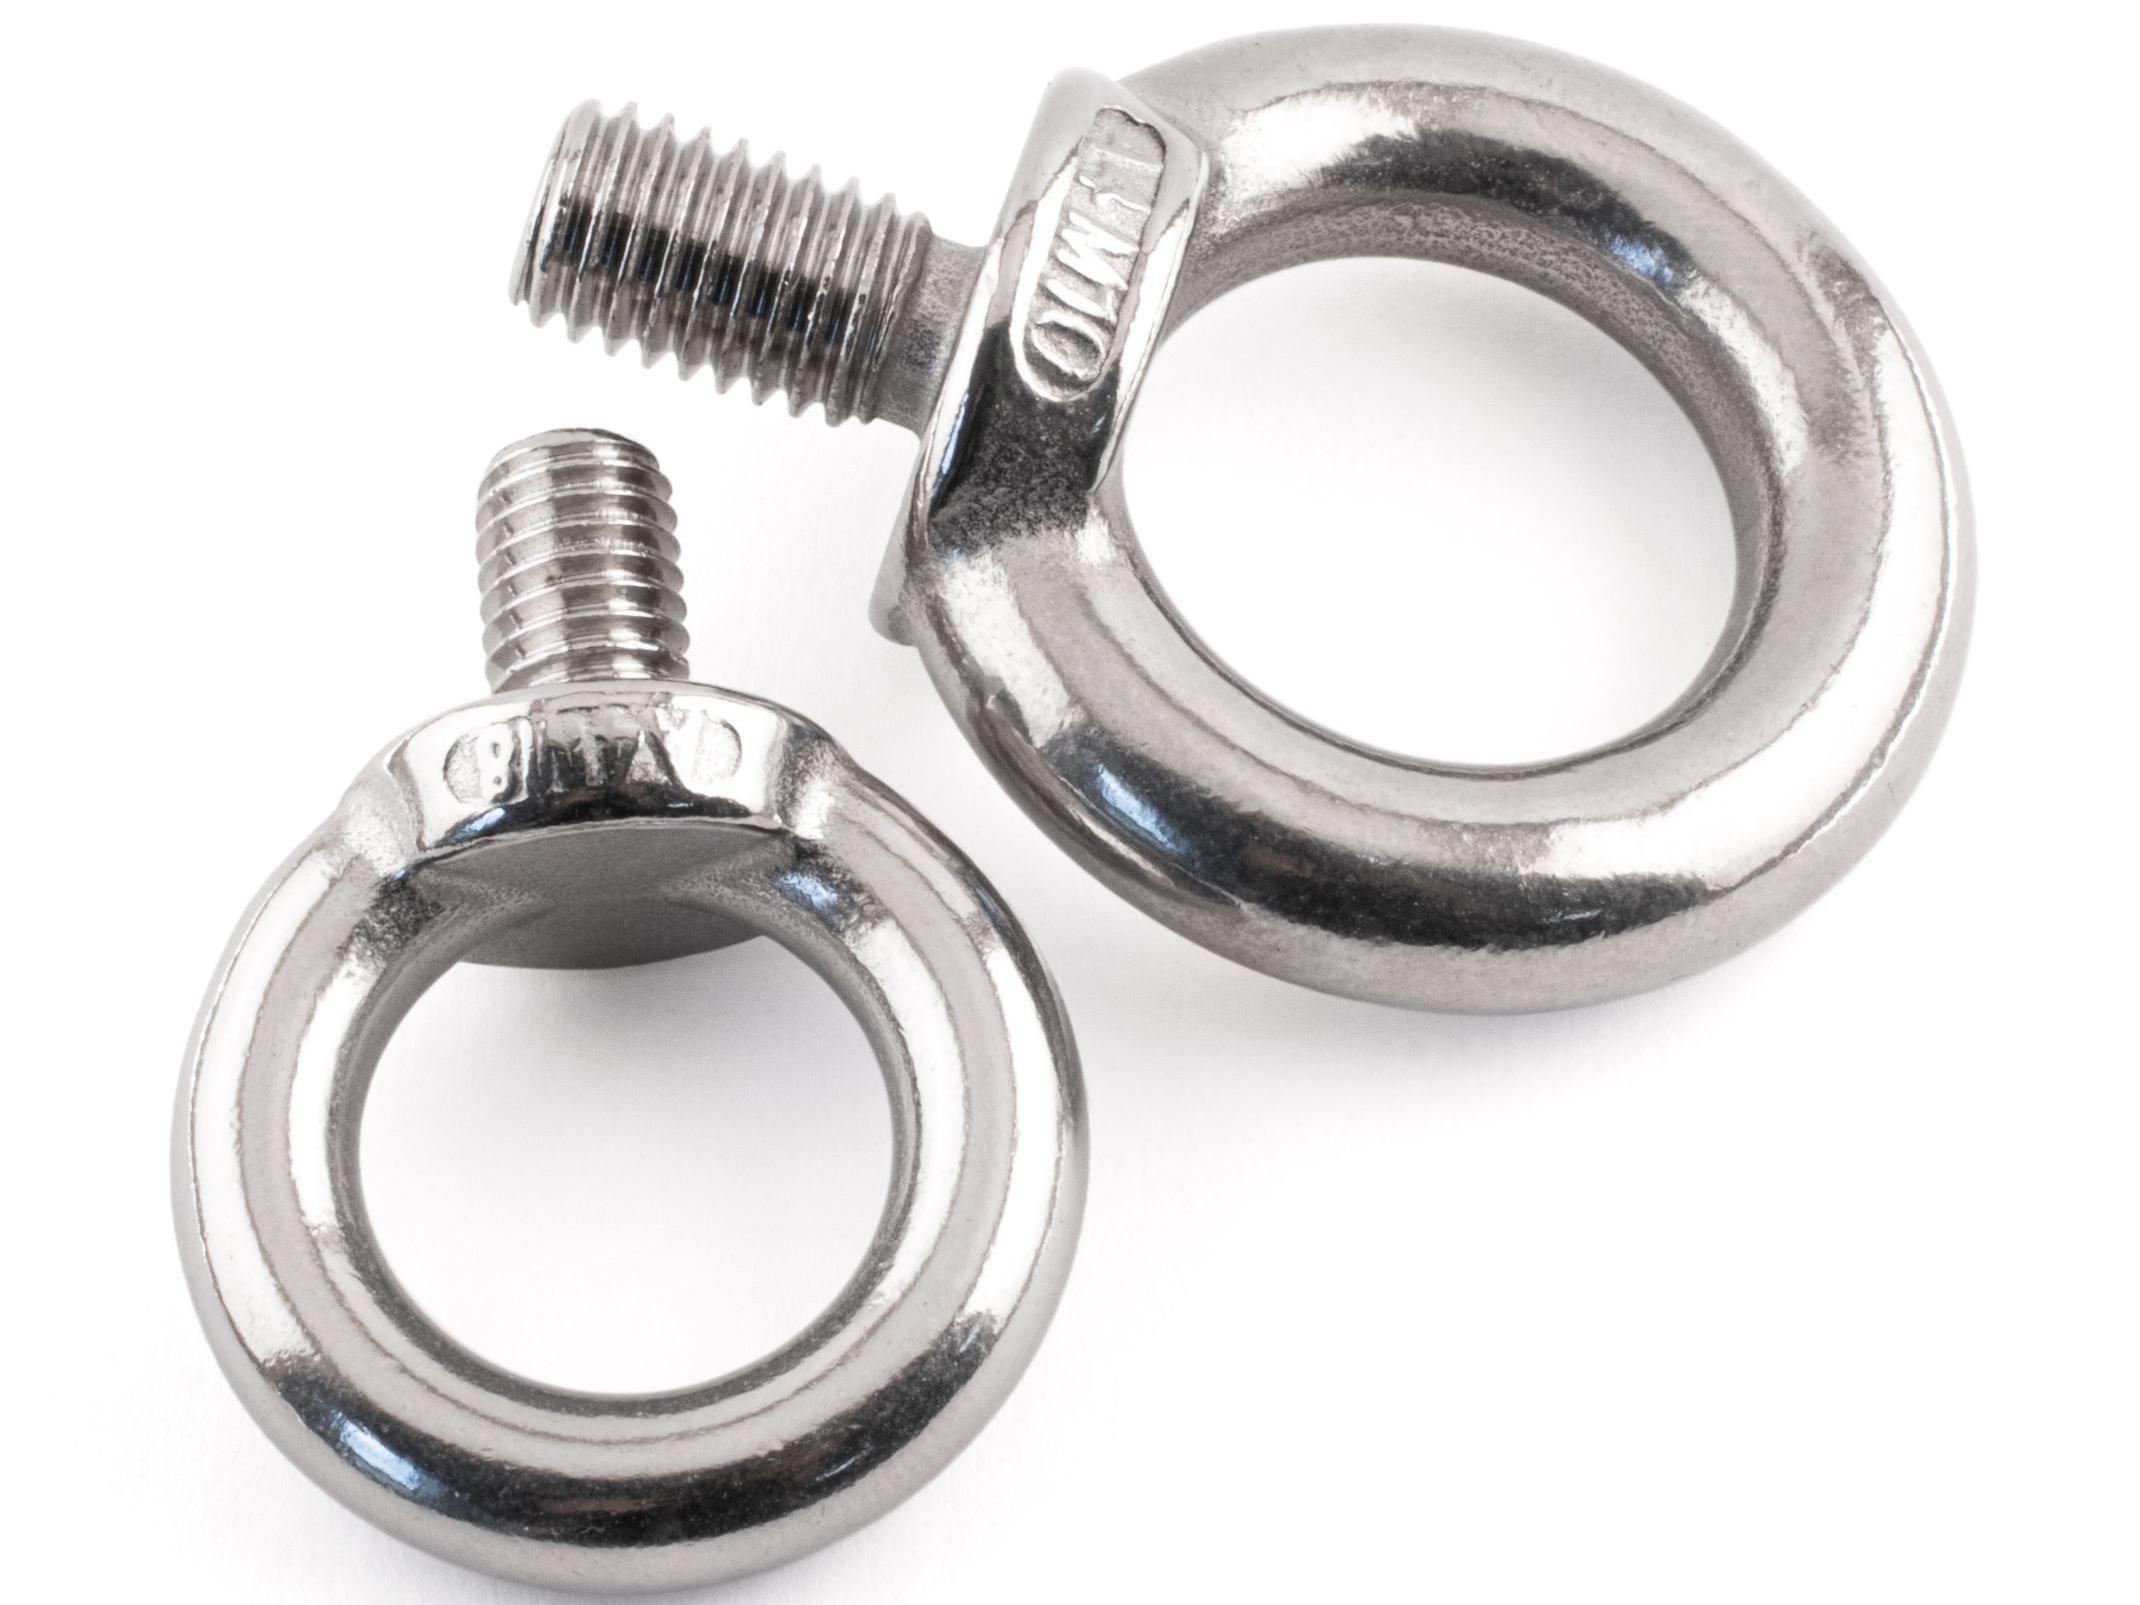 Marine grade stainless steel eye bolts and nuts at the ready